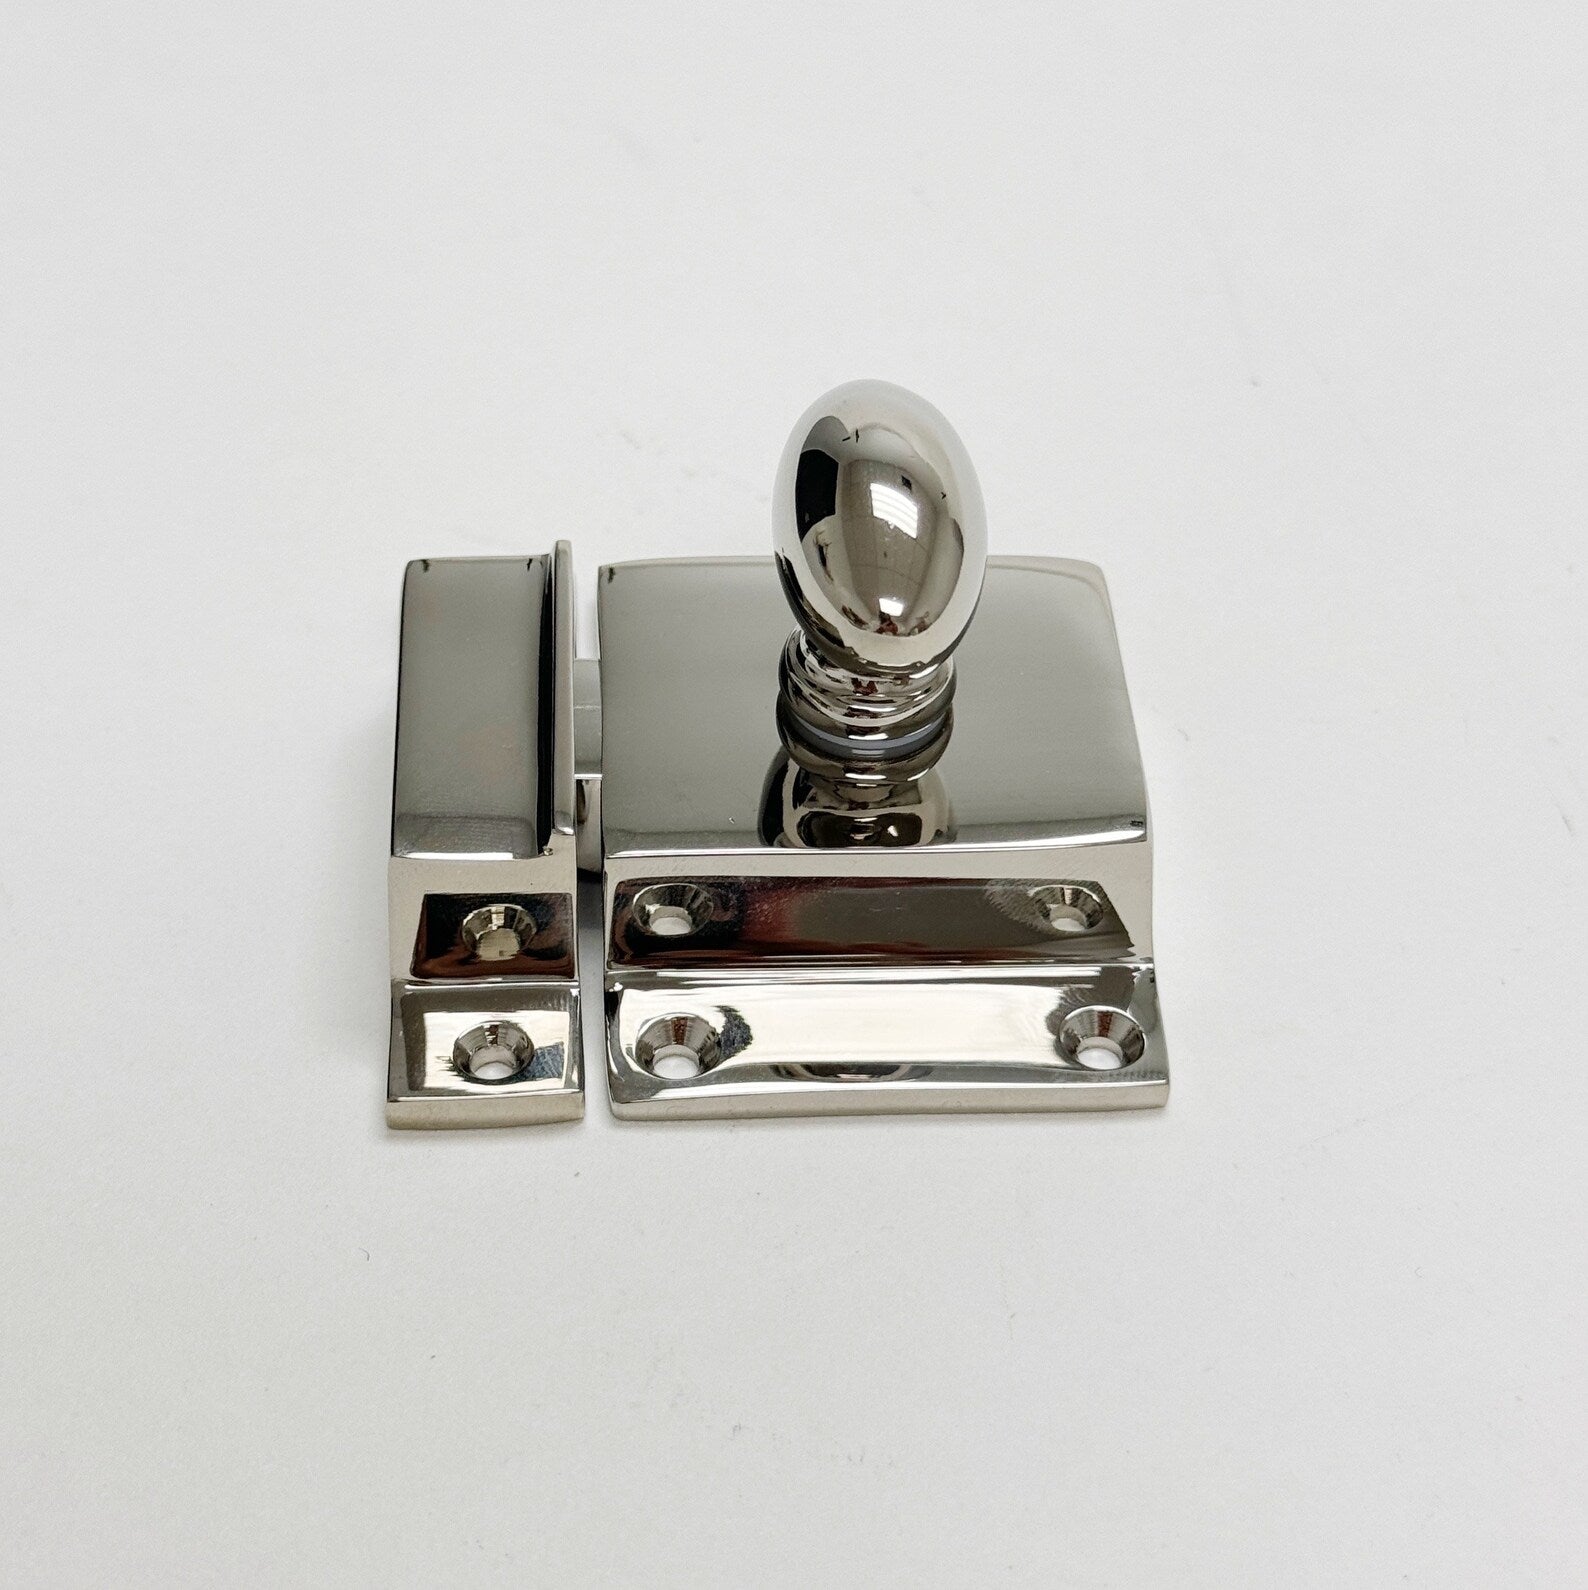 Polished Nickel "Heritage" Cabinet Knobs and Cup Pulls